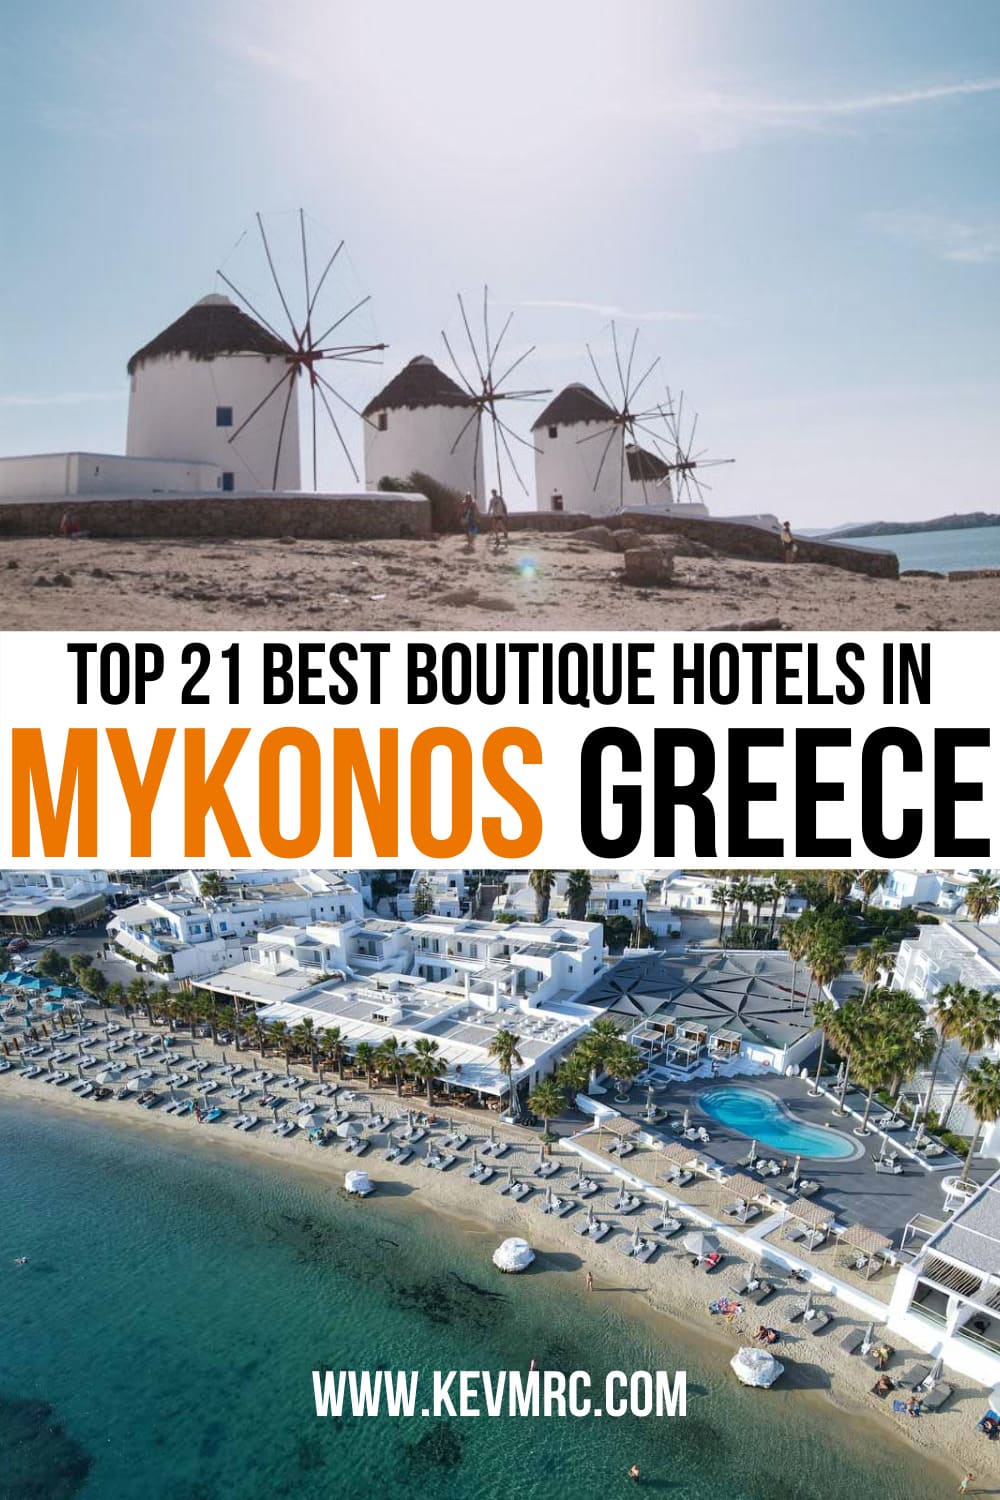 Staying in a boutique hotel in Mykonos is a very good idea as you can experience the Mykonian architecture and lifestyle. But there are literally tons of options, sometimes quite expensive. I've made this list of the 21 best Mykonos boutique hotels. boutique hotels mykonos | where to stay in mykonos | best mykonos hotels | mykonos hotel | mykonos greece hotels luxury